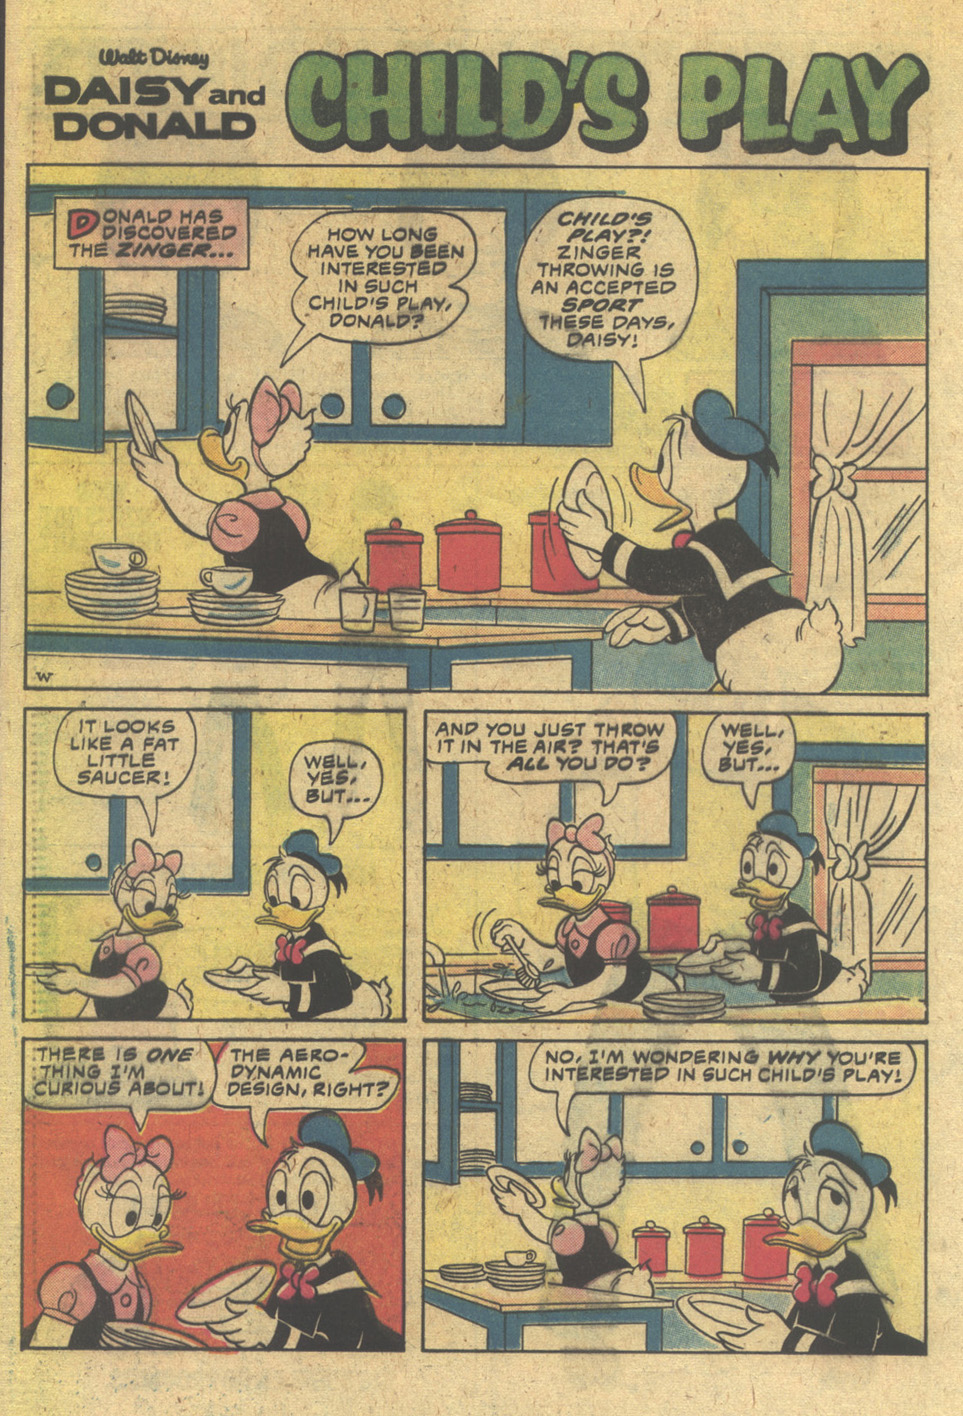 Read online Walt Disney Daisy and Donald comic -  Issue #44 - 24